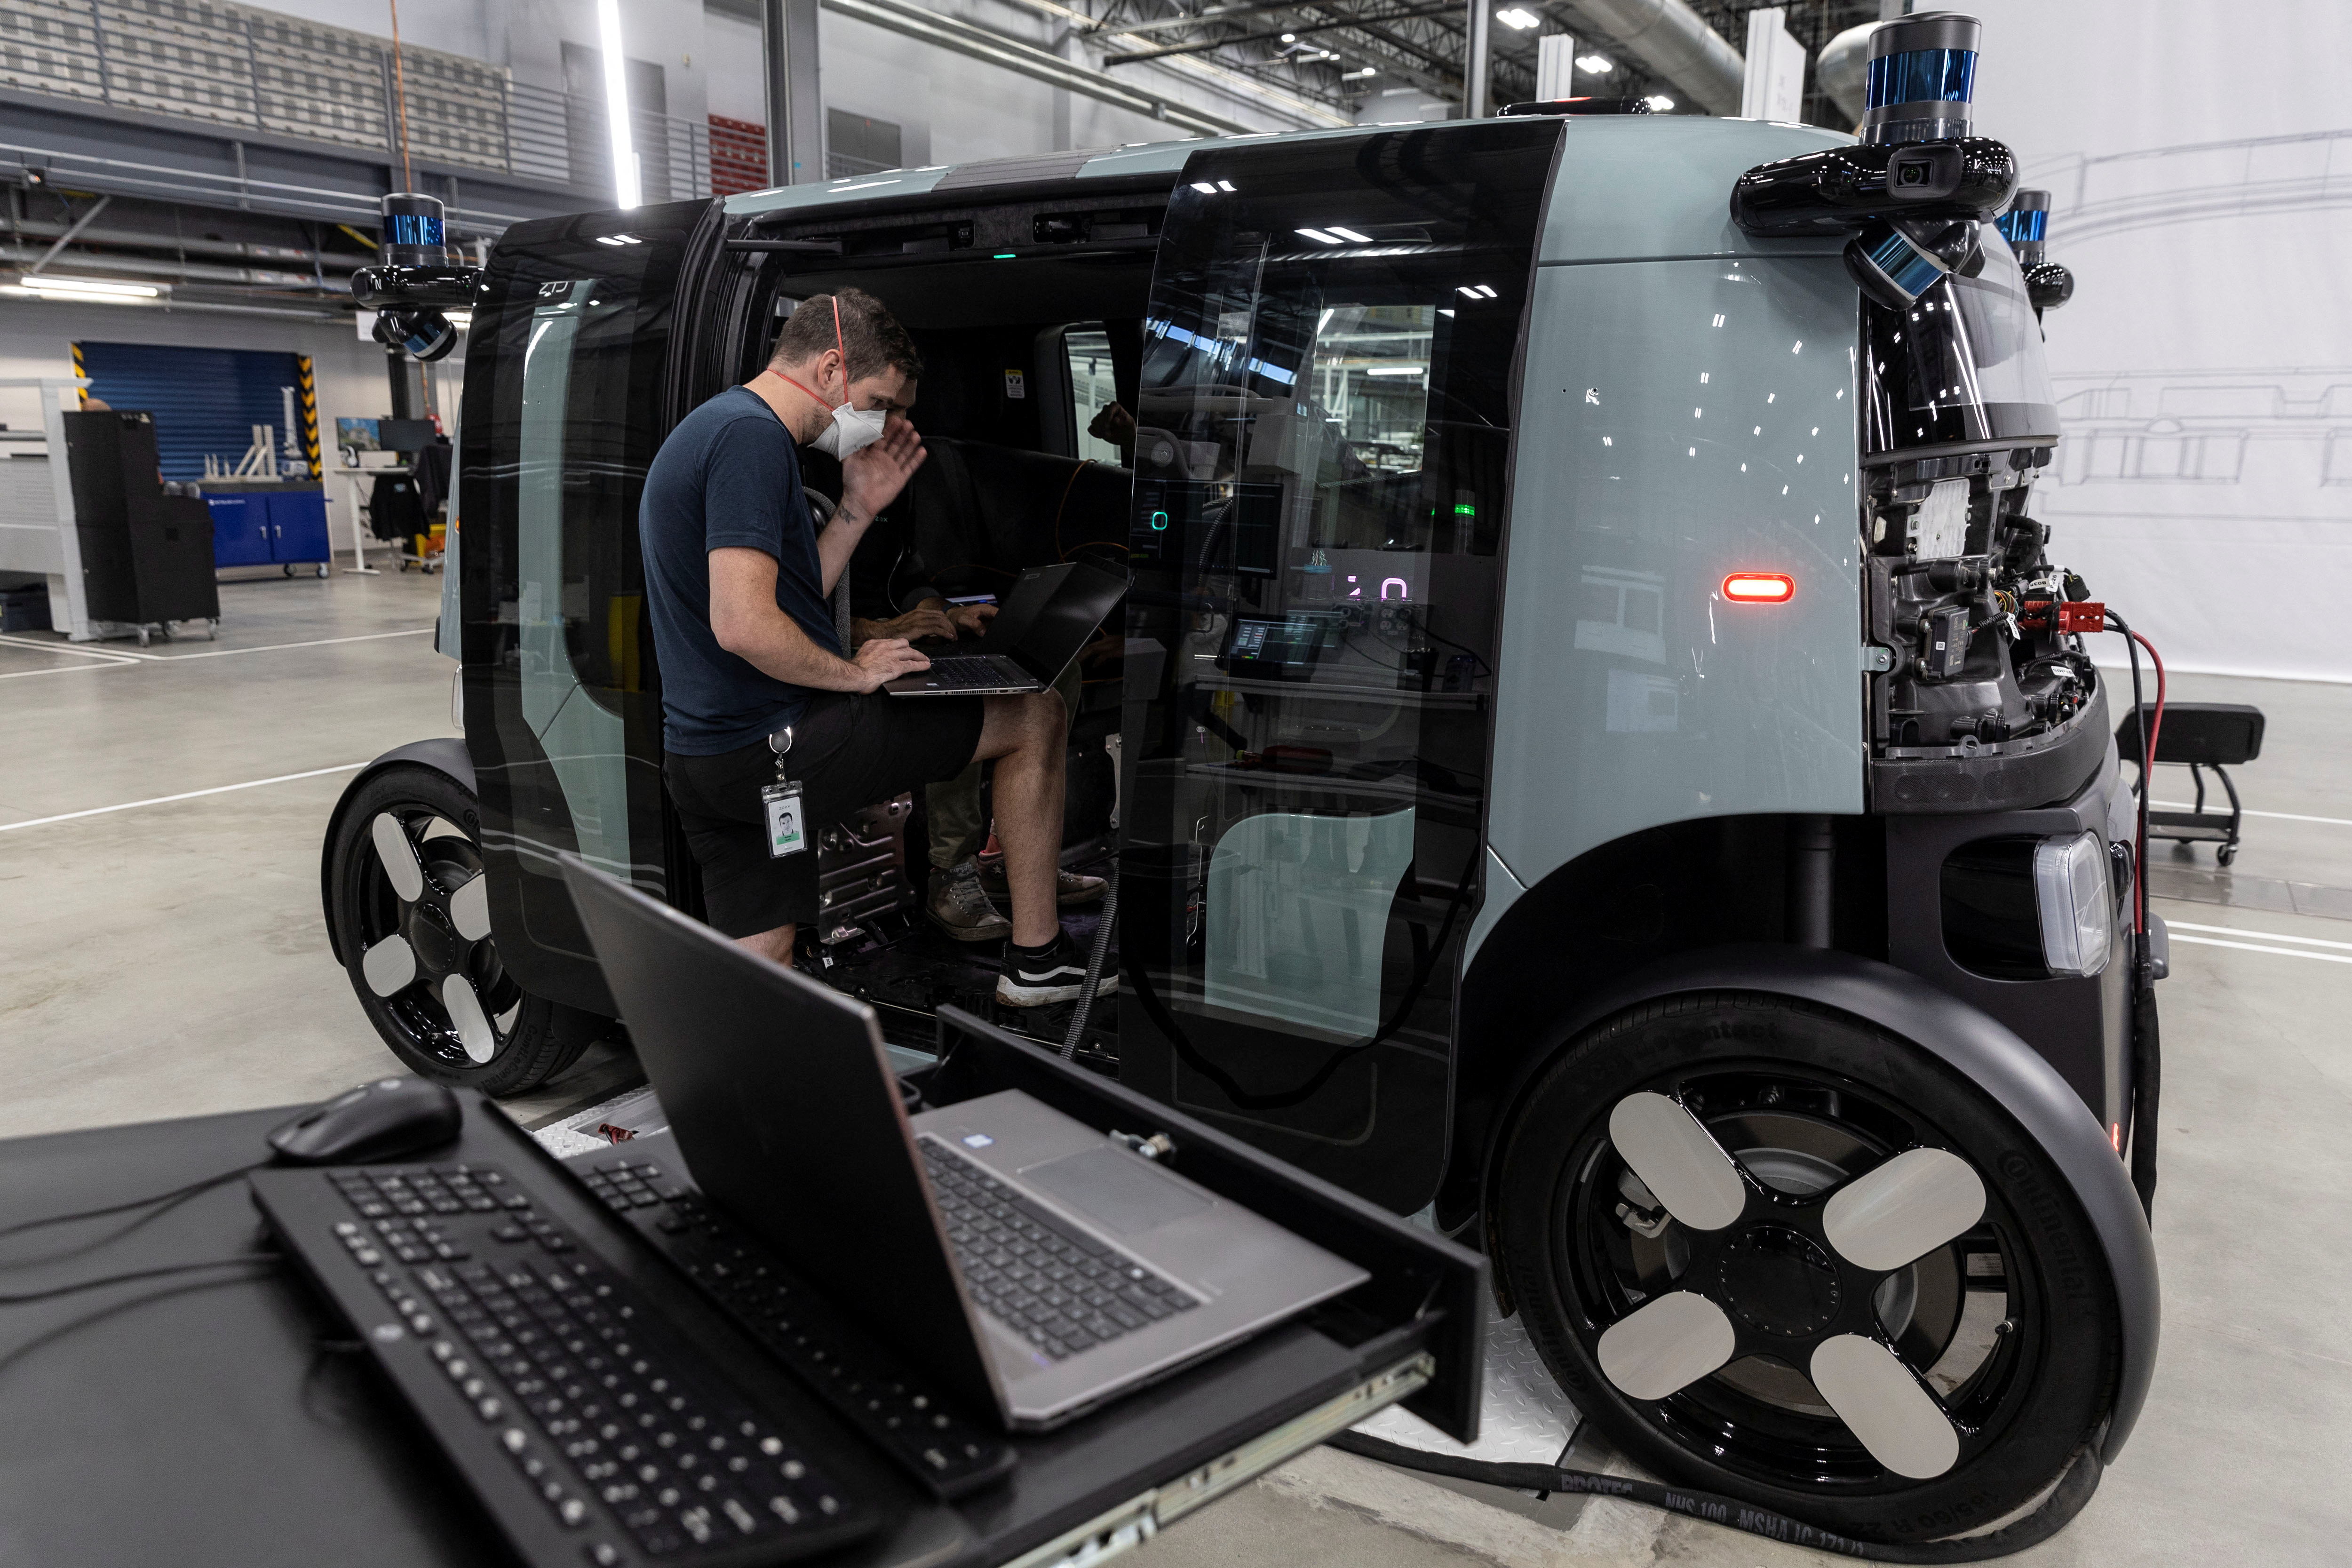 Media tour at the assembly line factory of Zoox, a self-driving vehicle owned by Amazon, in Fremont